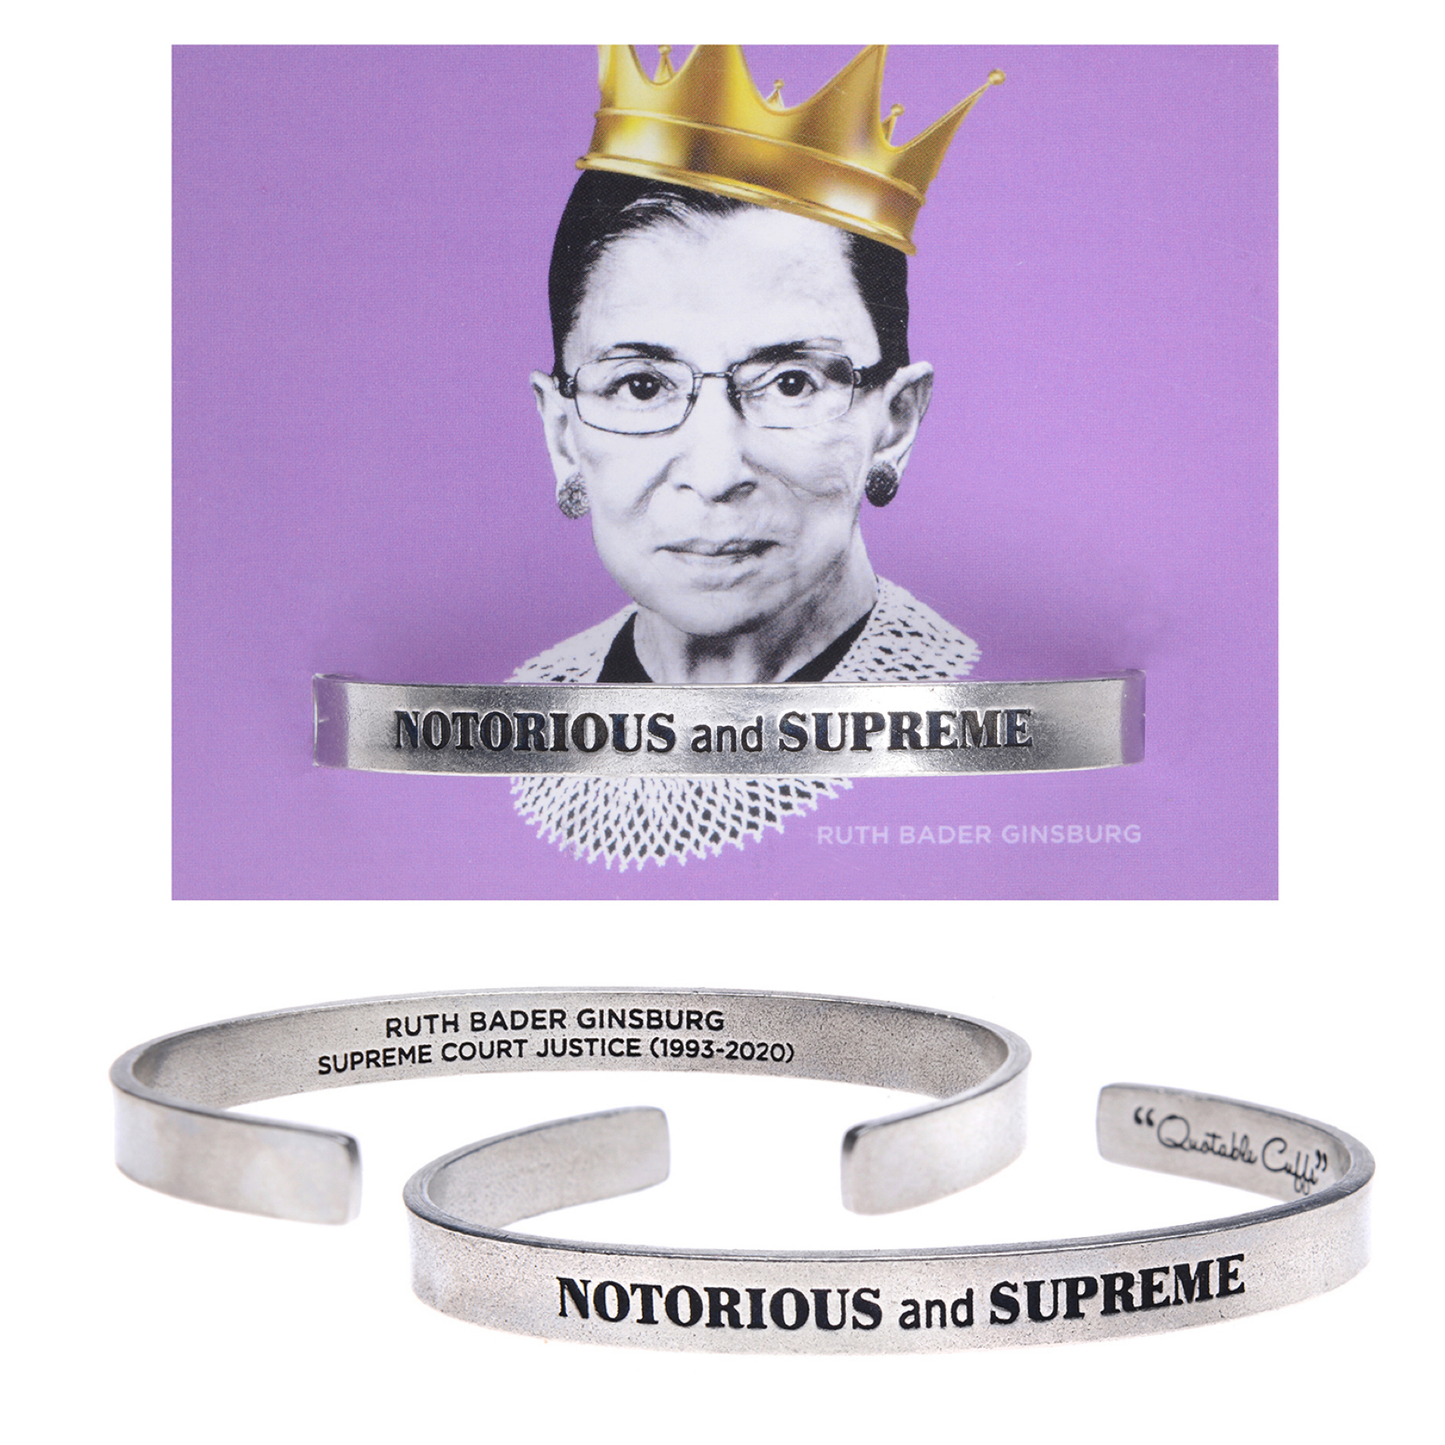 Notorious and Supreme Quotable Cuff Bracelet - Ruth Bader Ginsburg with backer card